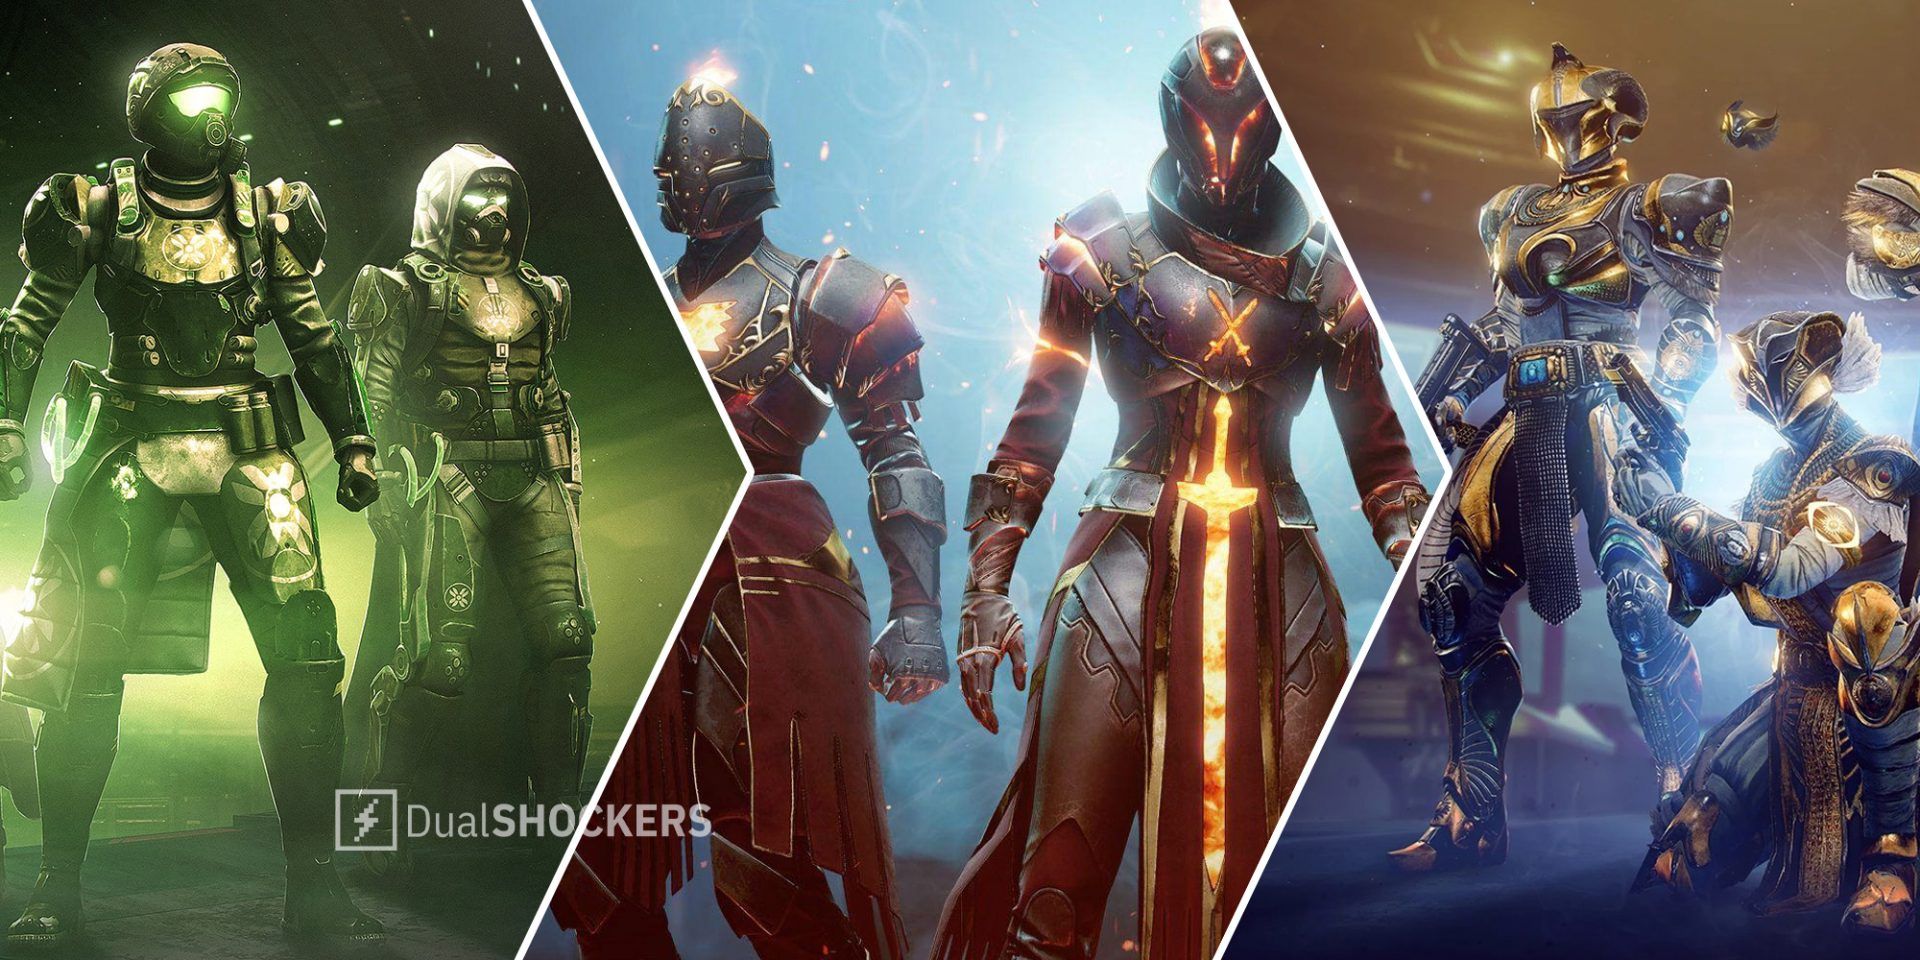 Destiny 2 characters on left, Season of the Haunted characters in middle, Destiny 2 characters on right